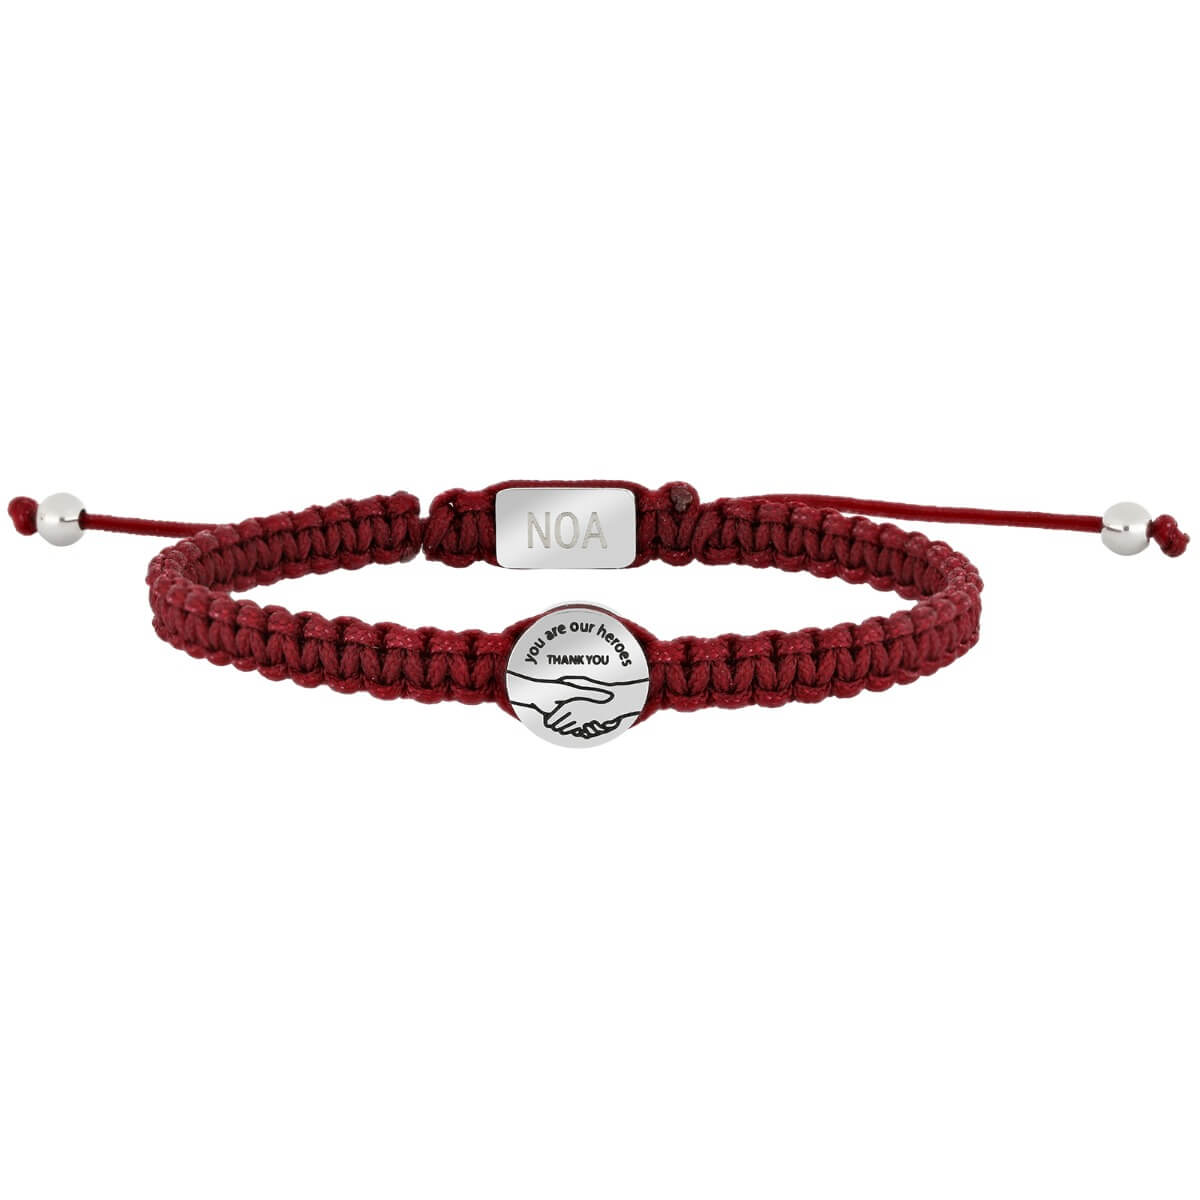 sonofnoa you are our heroes red bracelet 15 21cm 892 013